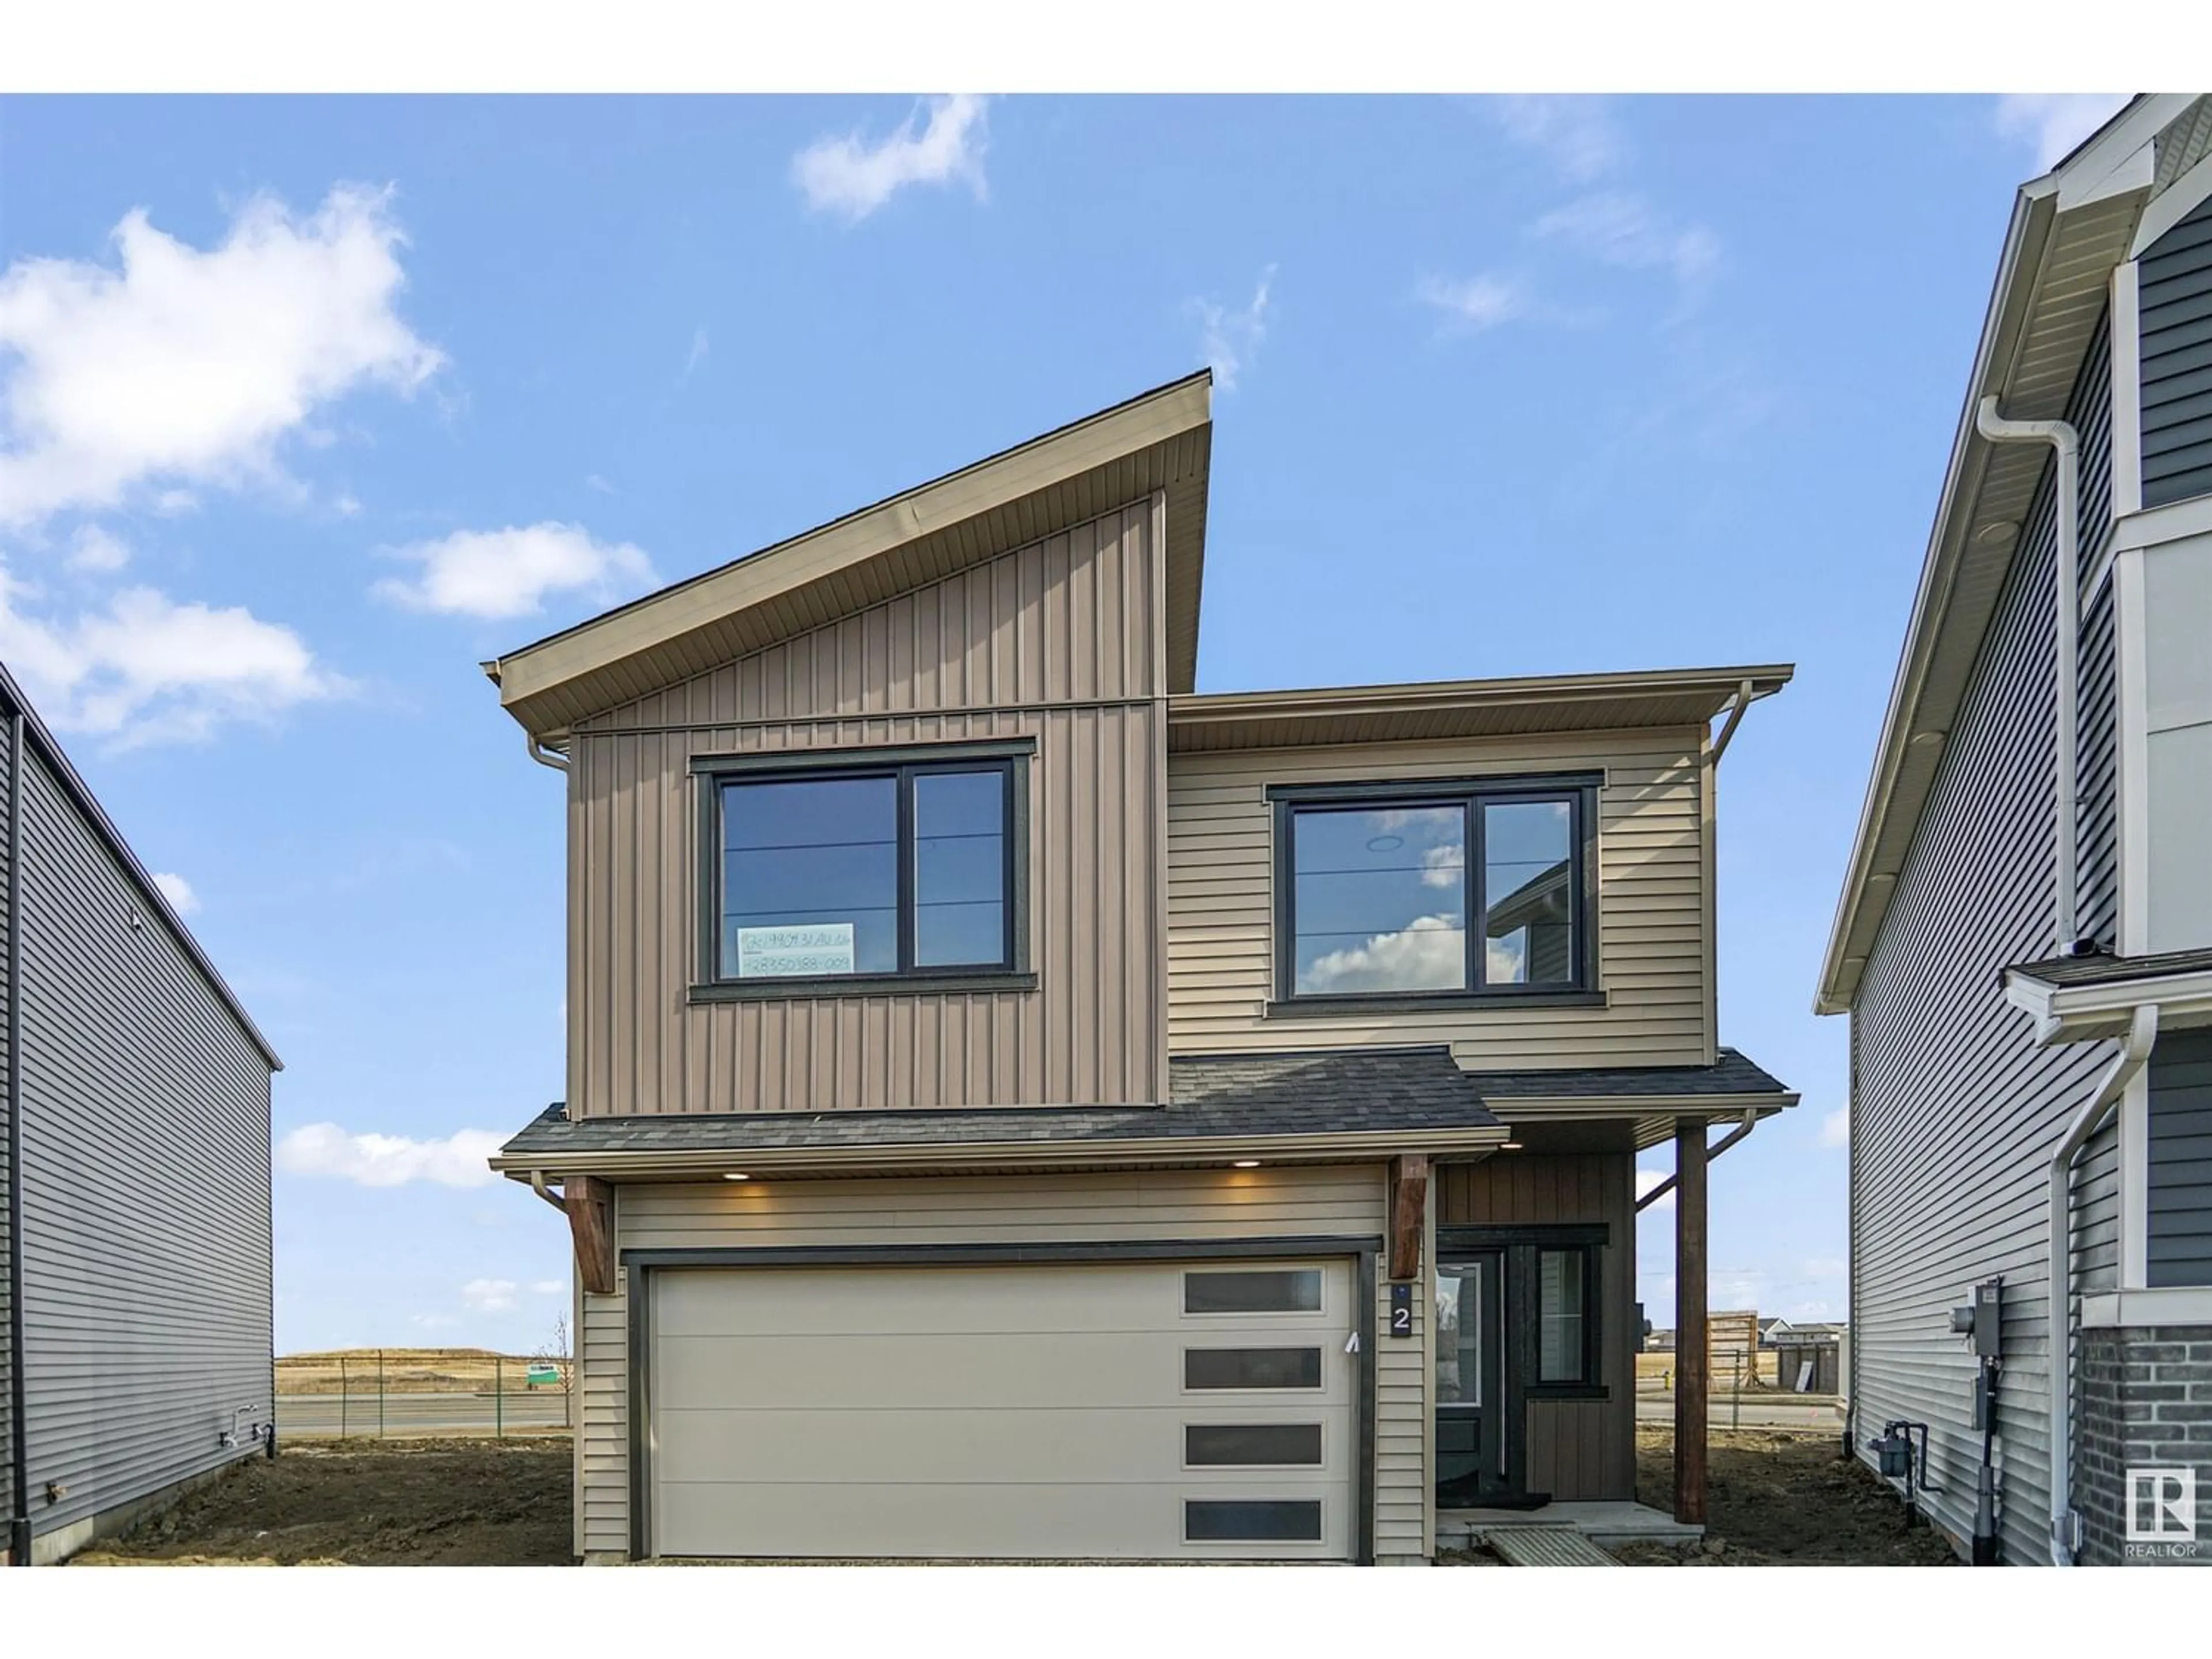 A pic from exterior of the house or condo for #2 19904 31 AV NW, Edmonton Alberta T6M1N7